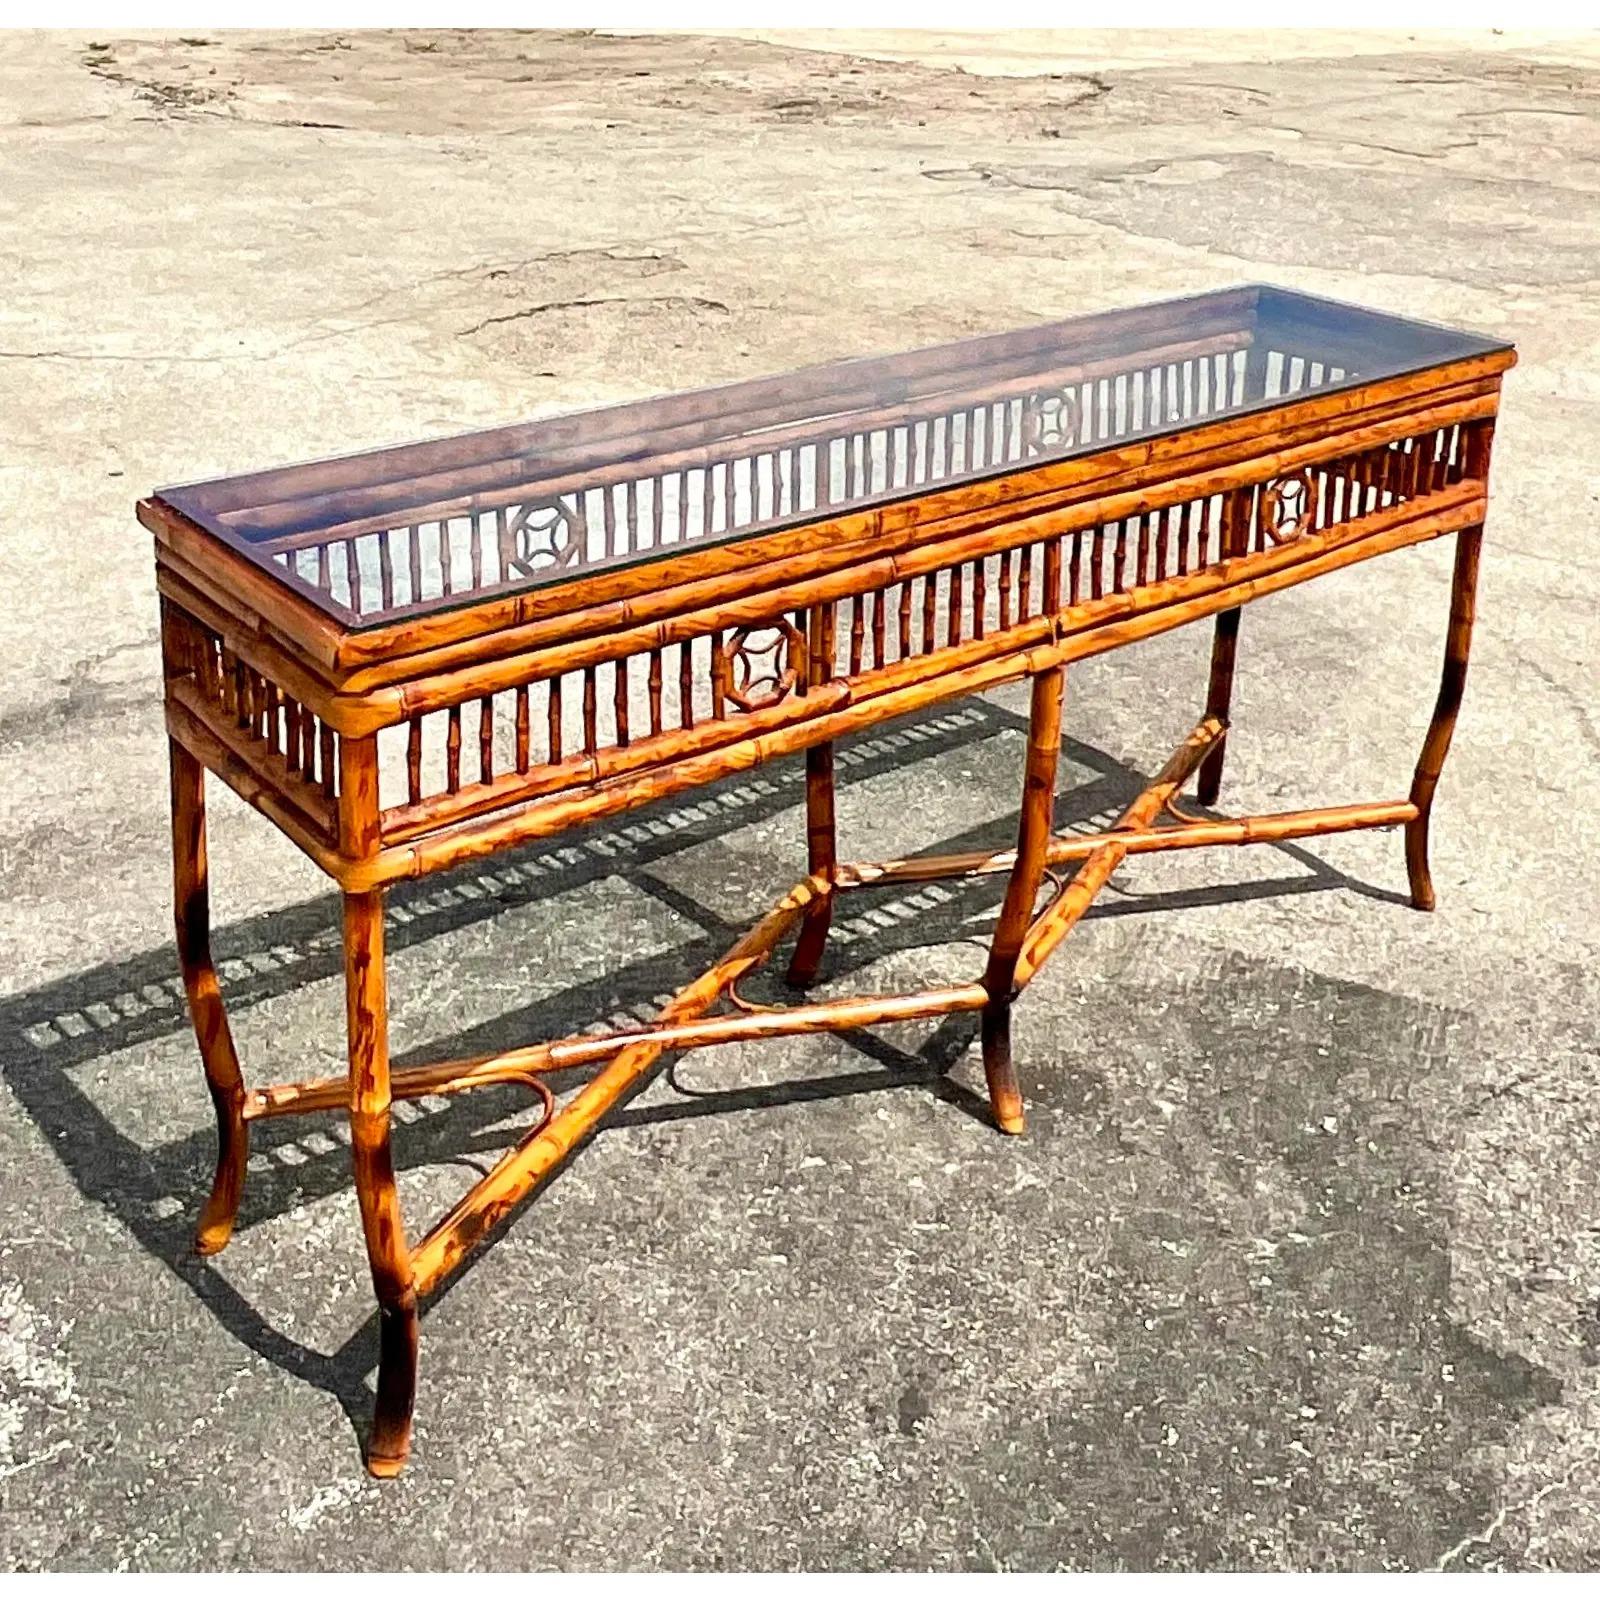 Fantastic vintage console table. Beautiful tortoise shell finish rattan in a chic open design. Inset glass top. Acquired from a Palm Beach estate.